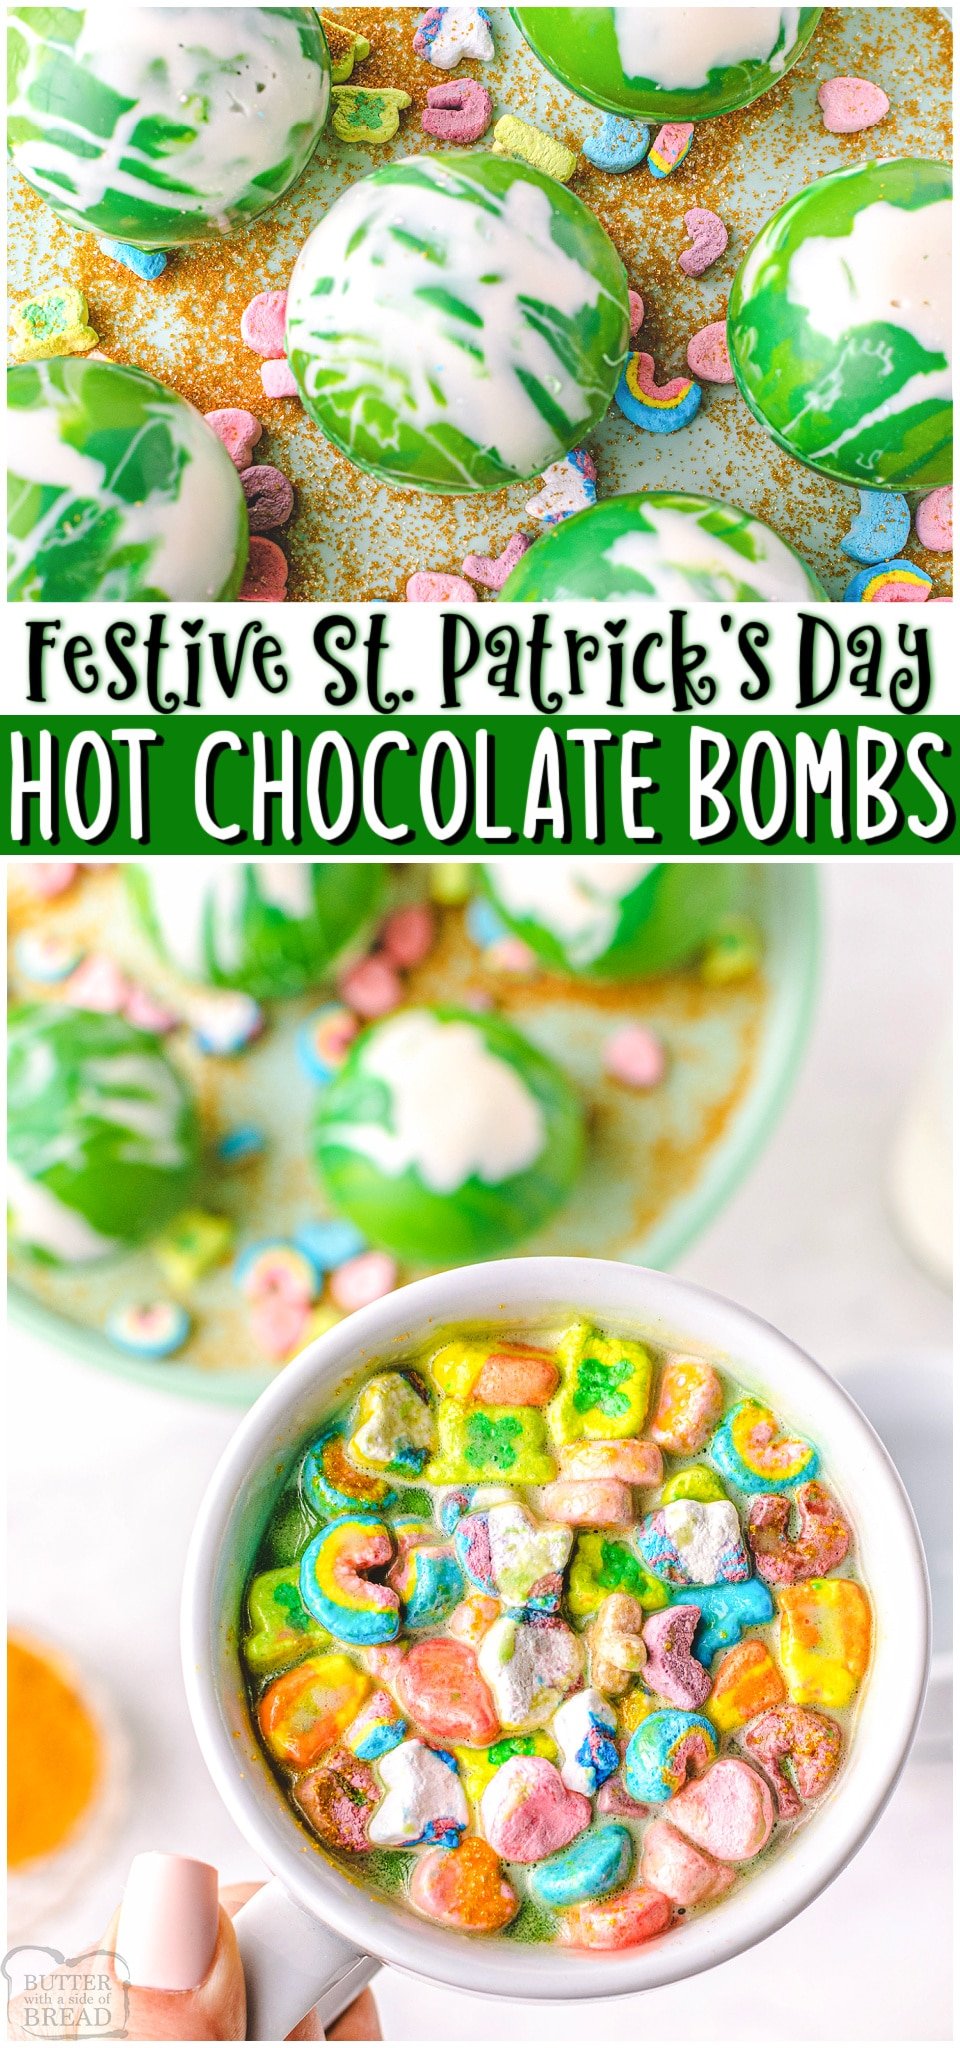 St Patrick's Day Hot Chocolate Bombs are a fun and festive way to enjoy your warm cocoa drink this holiday. With green spheres packed with colors, flavorful cocoa, and golden sugar sprinkles, every sip is as fun as it is tasty.